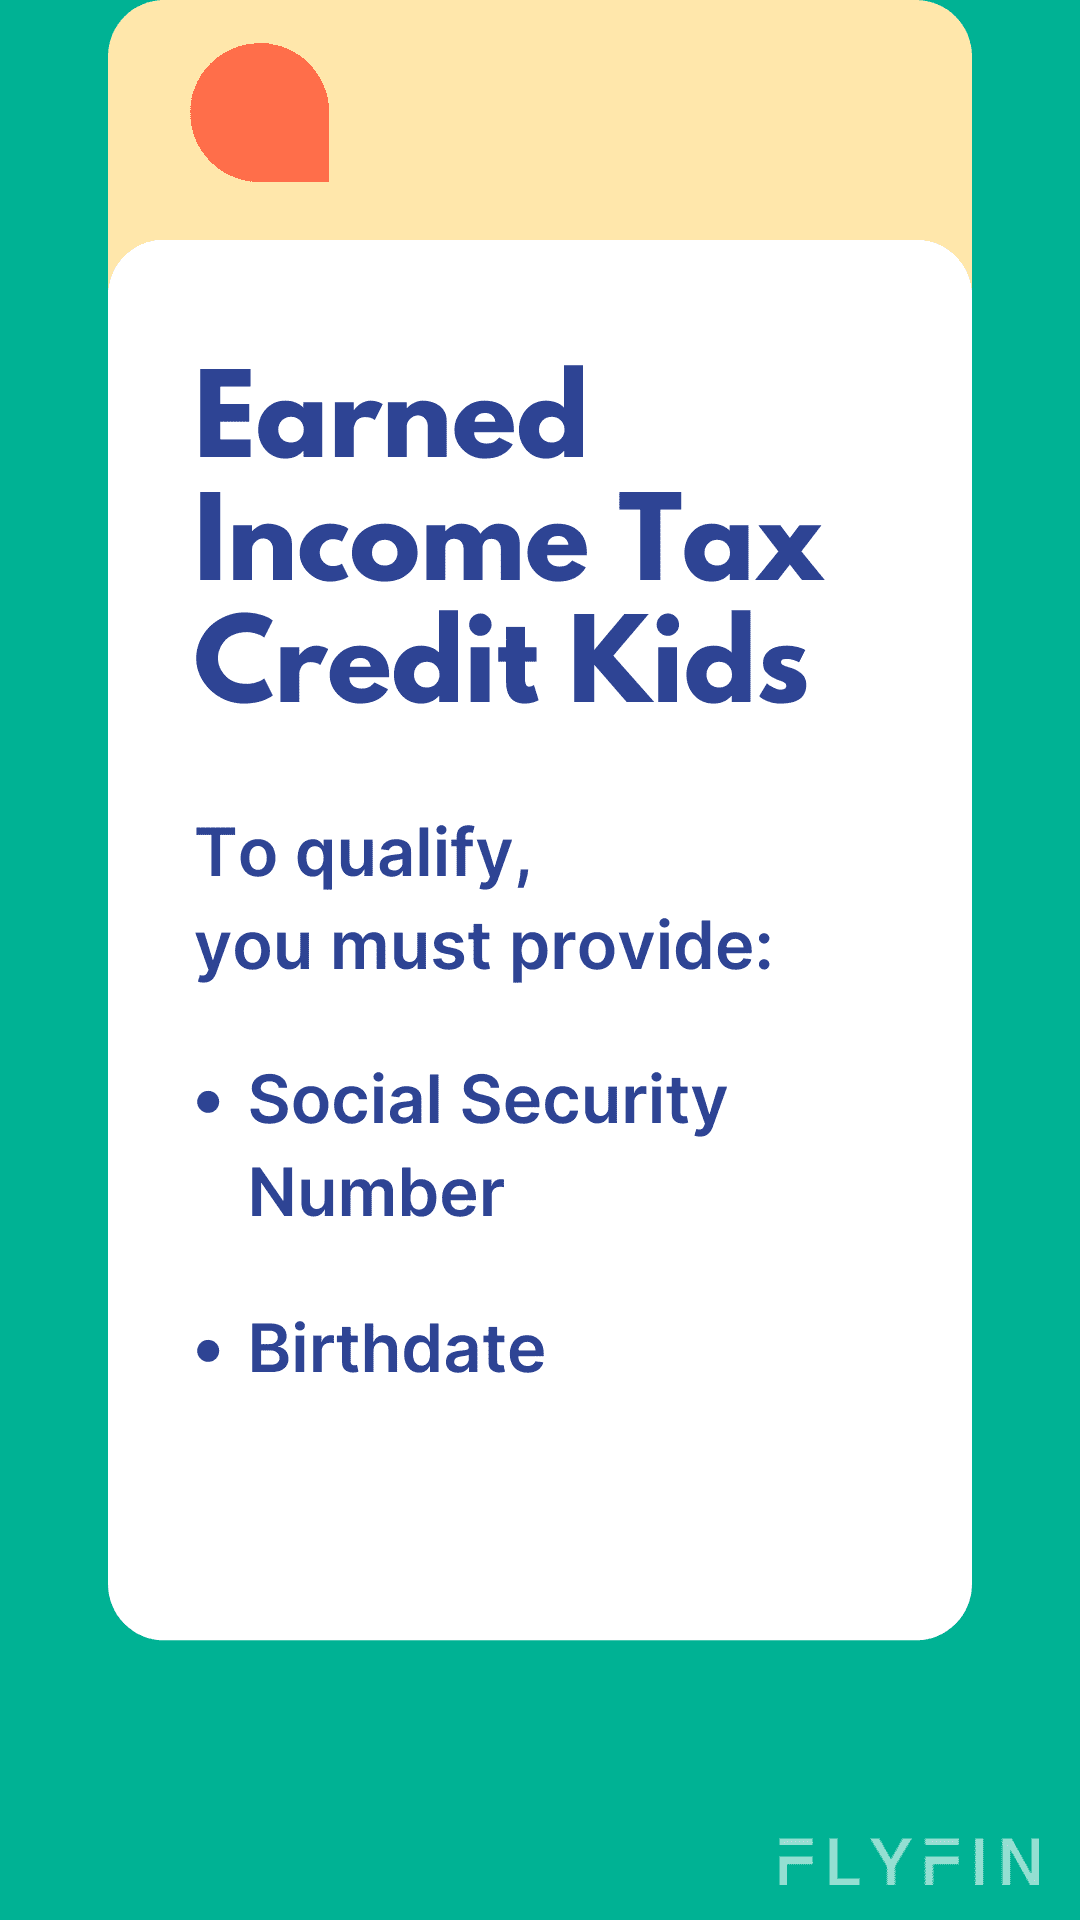 Image with text about Earned Income Tax Credit for kids. Requirements include providing Social Security Number and Birthdate. Relevant for tax purposes.